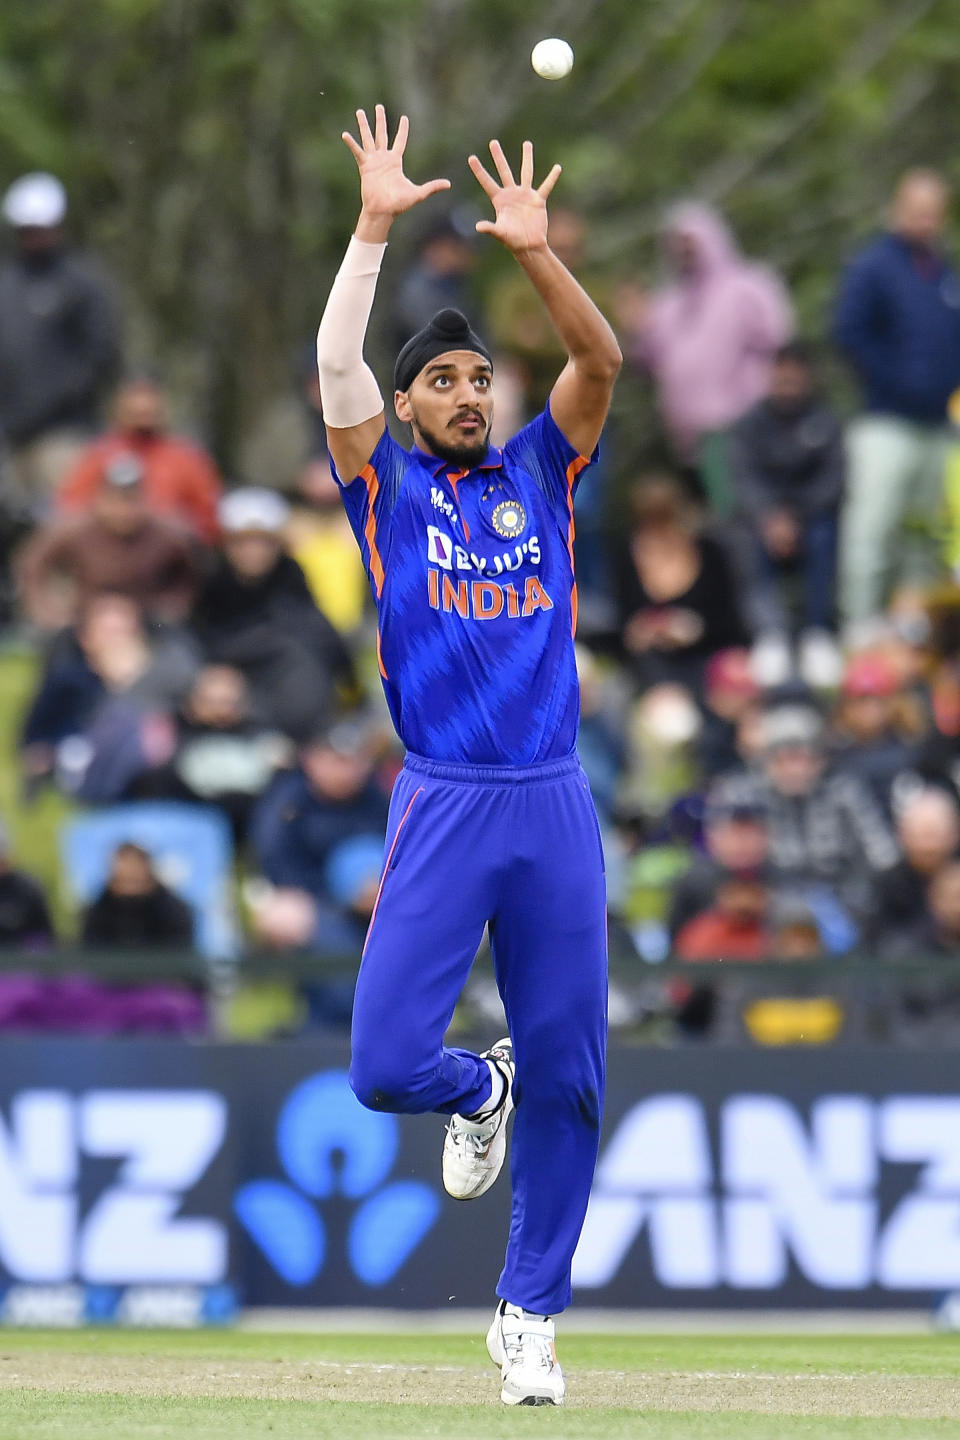 Arshdeep Singh of India fields the ball during the one day cricket international between India and New Zealand at Hagley Oval, in Christchurch, New Zealand, Wednesday, Nov. 30, 2022. (John Davidson /Photosport via AP)